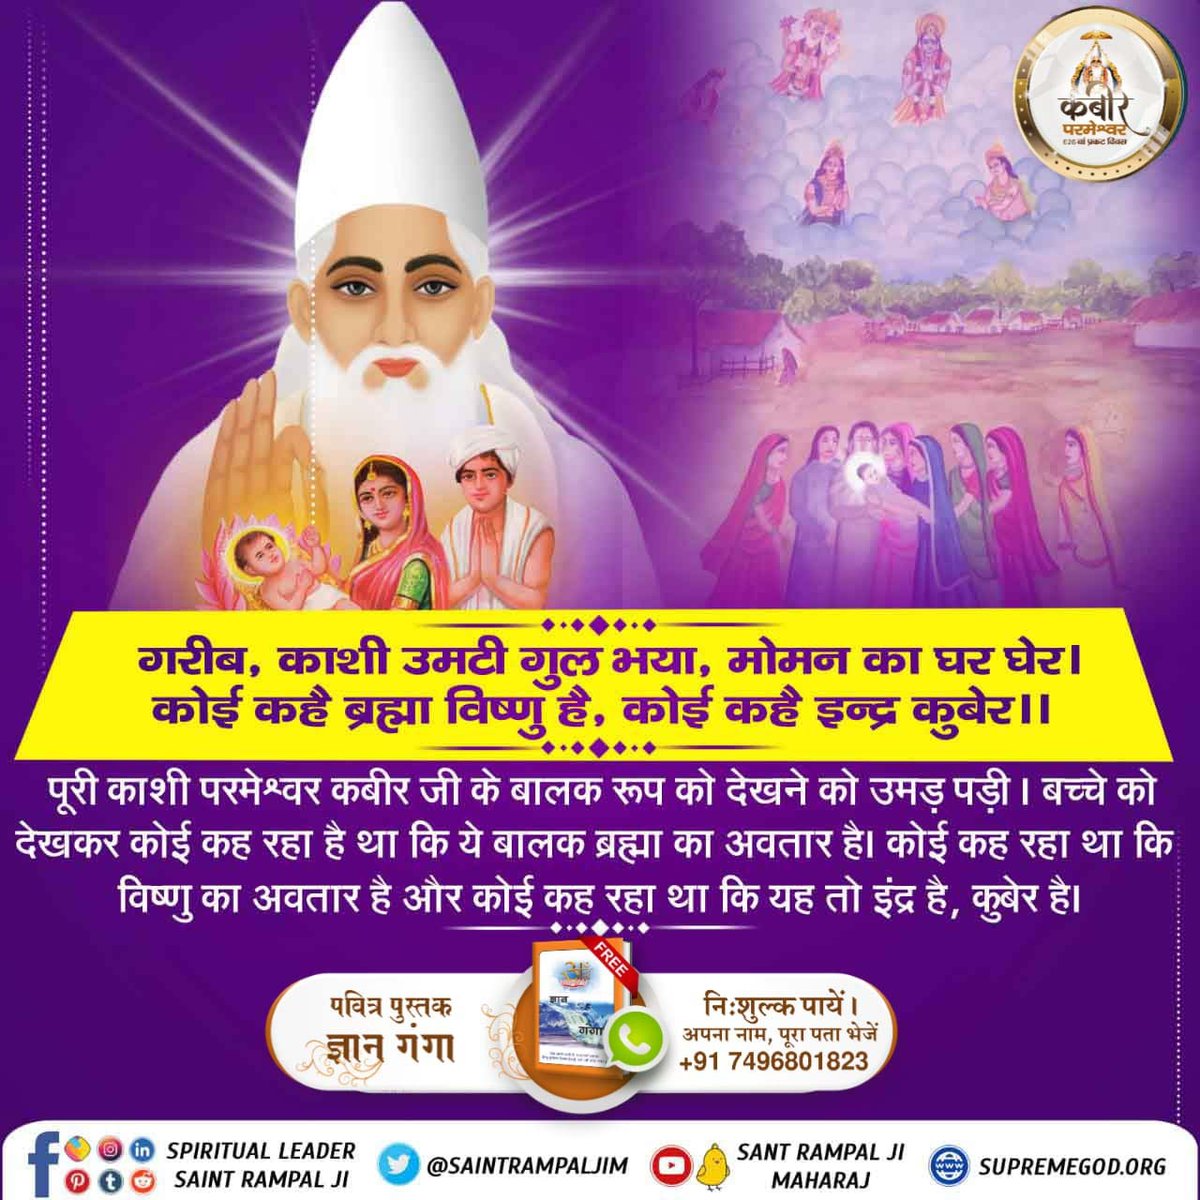 #626वां_कबीरसाहेब_प्रकटदिवस
In, 1398 Lord Kabir Ji descended from his Supreme Abode Satlok and appeared on a lotus in Lehartara Pond in Kashi, Uttarpradesh to perform his divine plays in order to grant complete Salvation to his beloved souls.